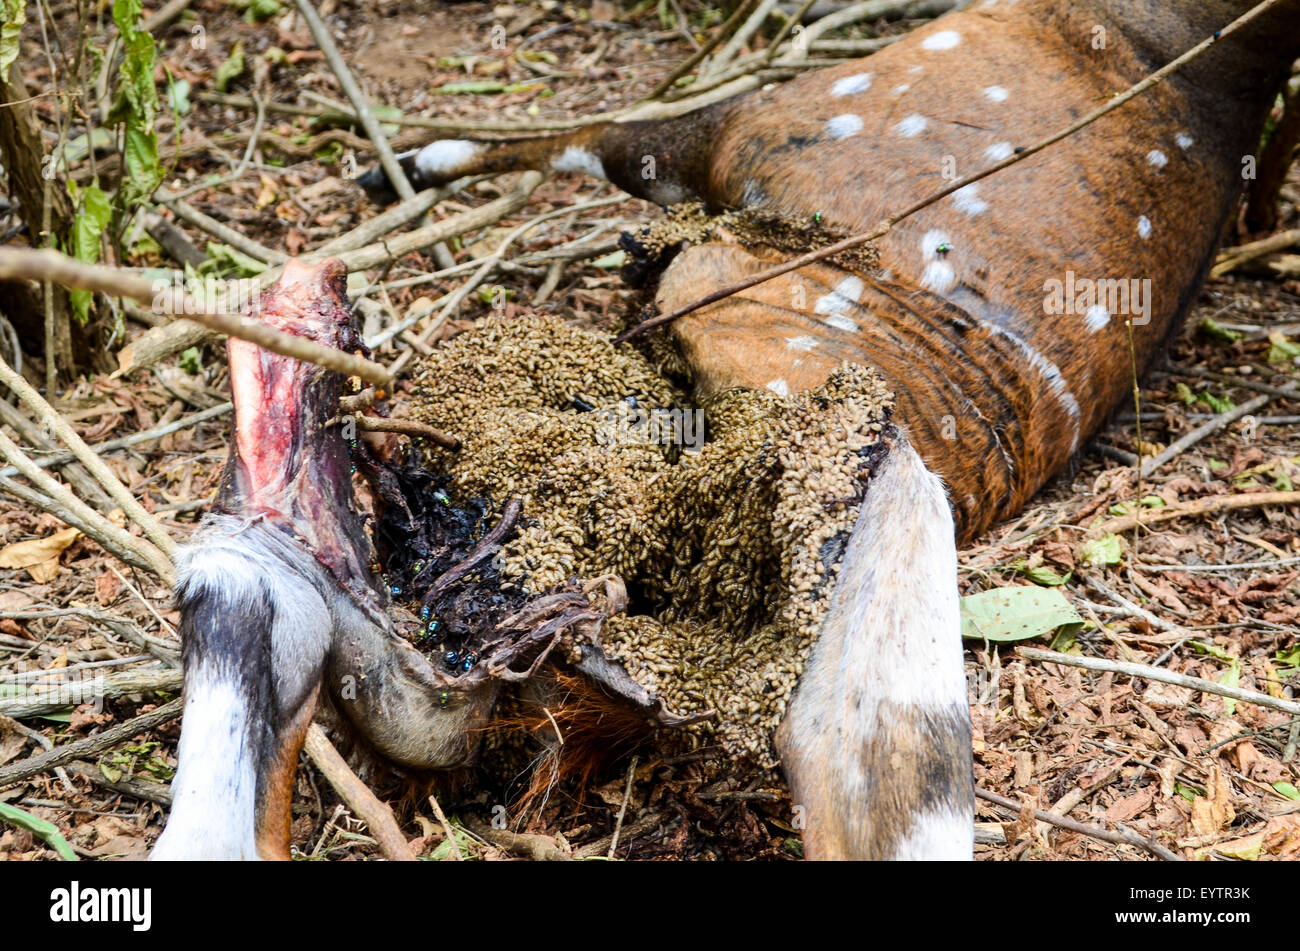 Maggots and flies eating the bowels of a deer killed in rural Angola Stock Photo